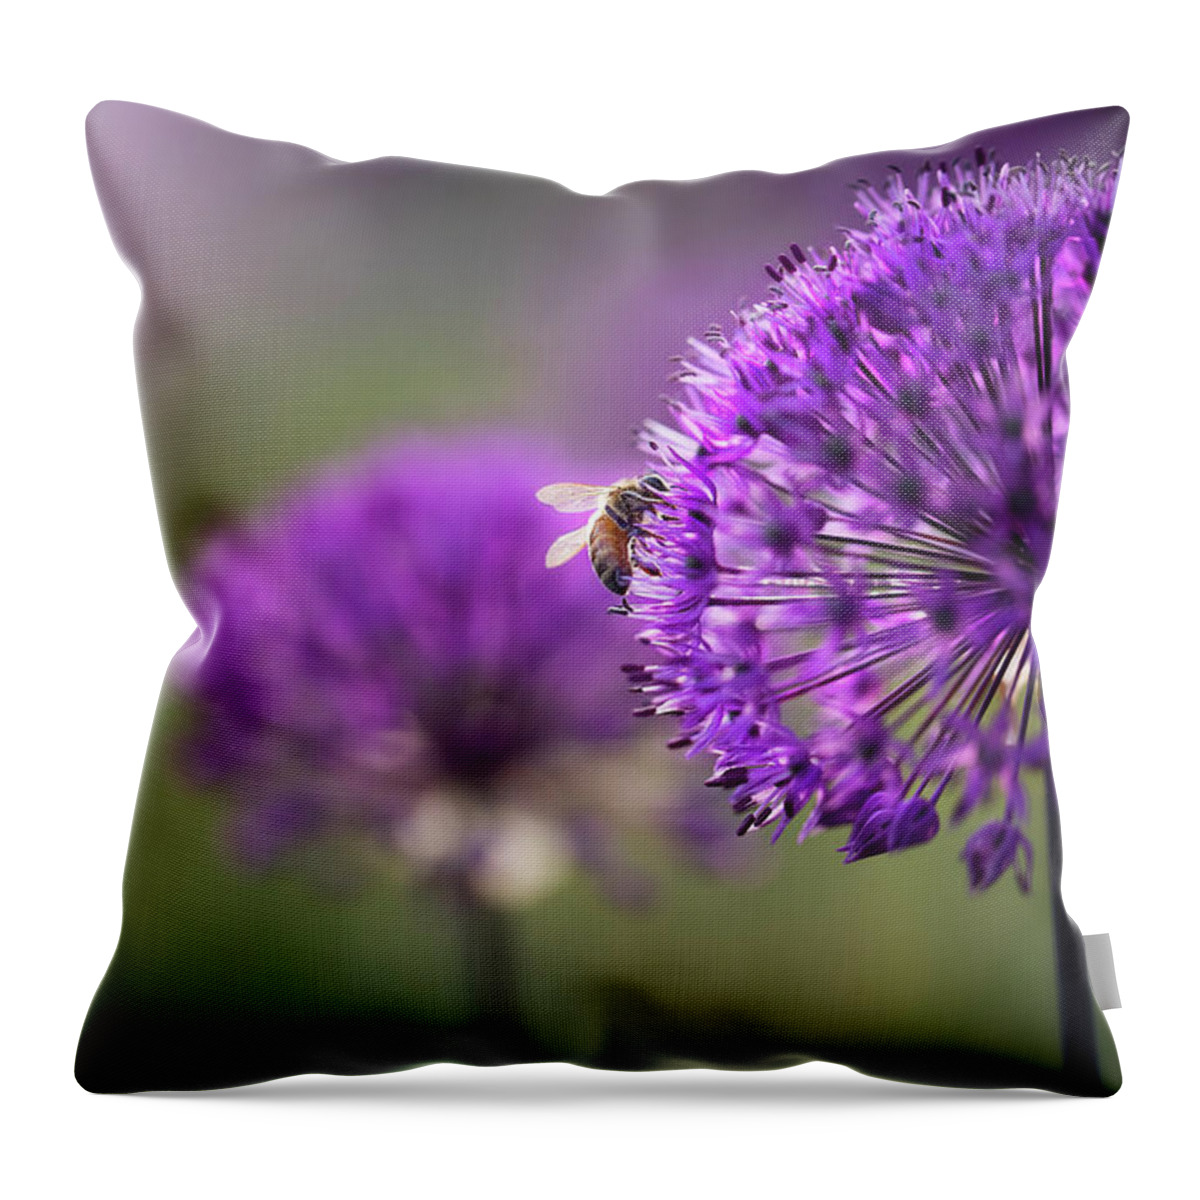  Throw Pillow featuring the photograph Purple Puff by Nicole Engstrom